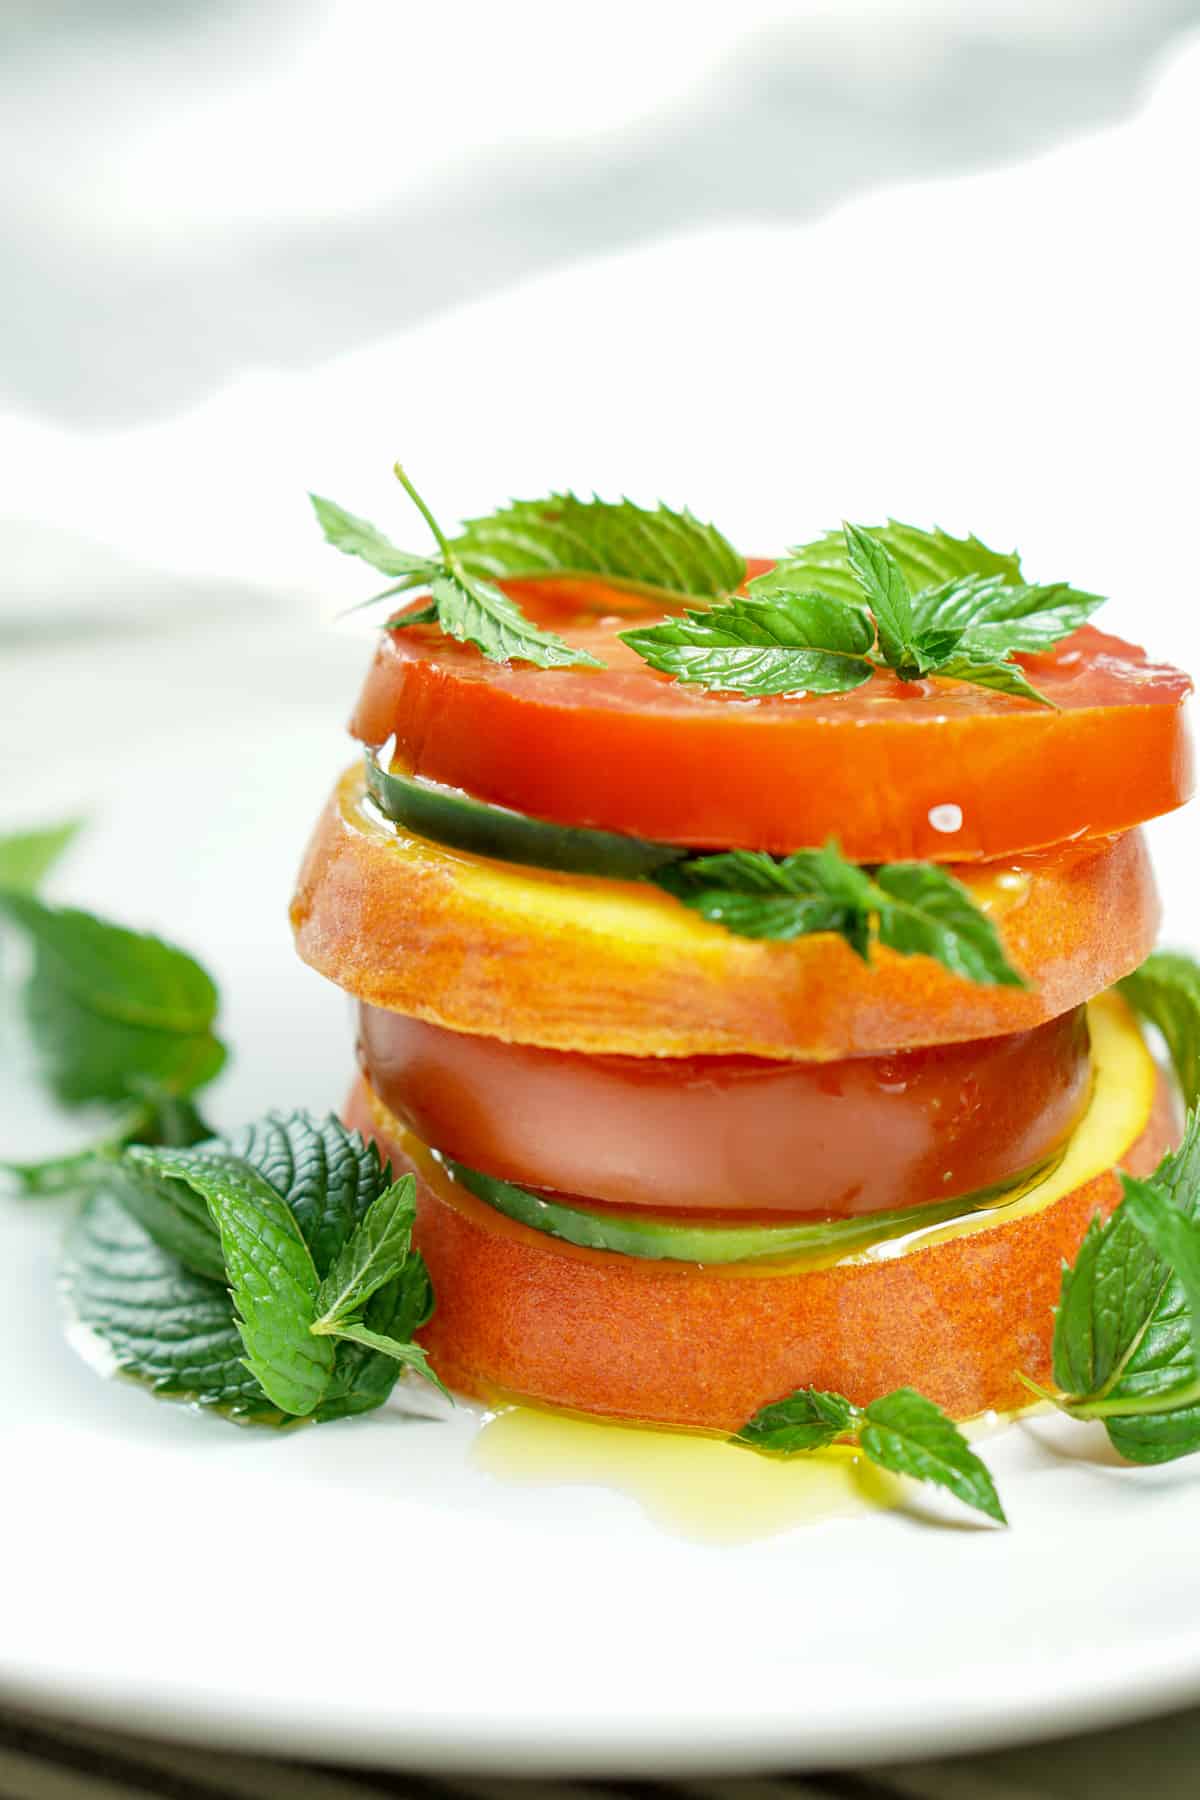 Peach Tomato Mint Salad Stack Recipe - Simply slice fresh peaches, tomatoes and cucumbers, stacking with mint to create this great appetizer, light meal or side salad. This will definitely be a recipe to impress your friends at your next barbq or family dinner!